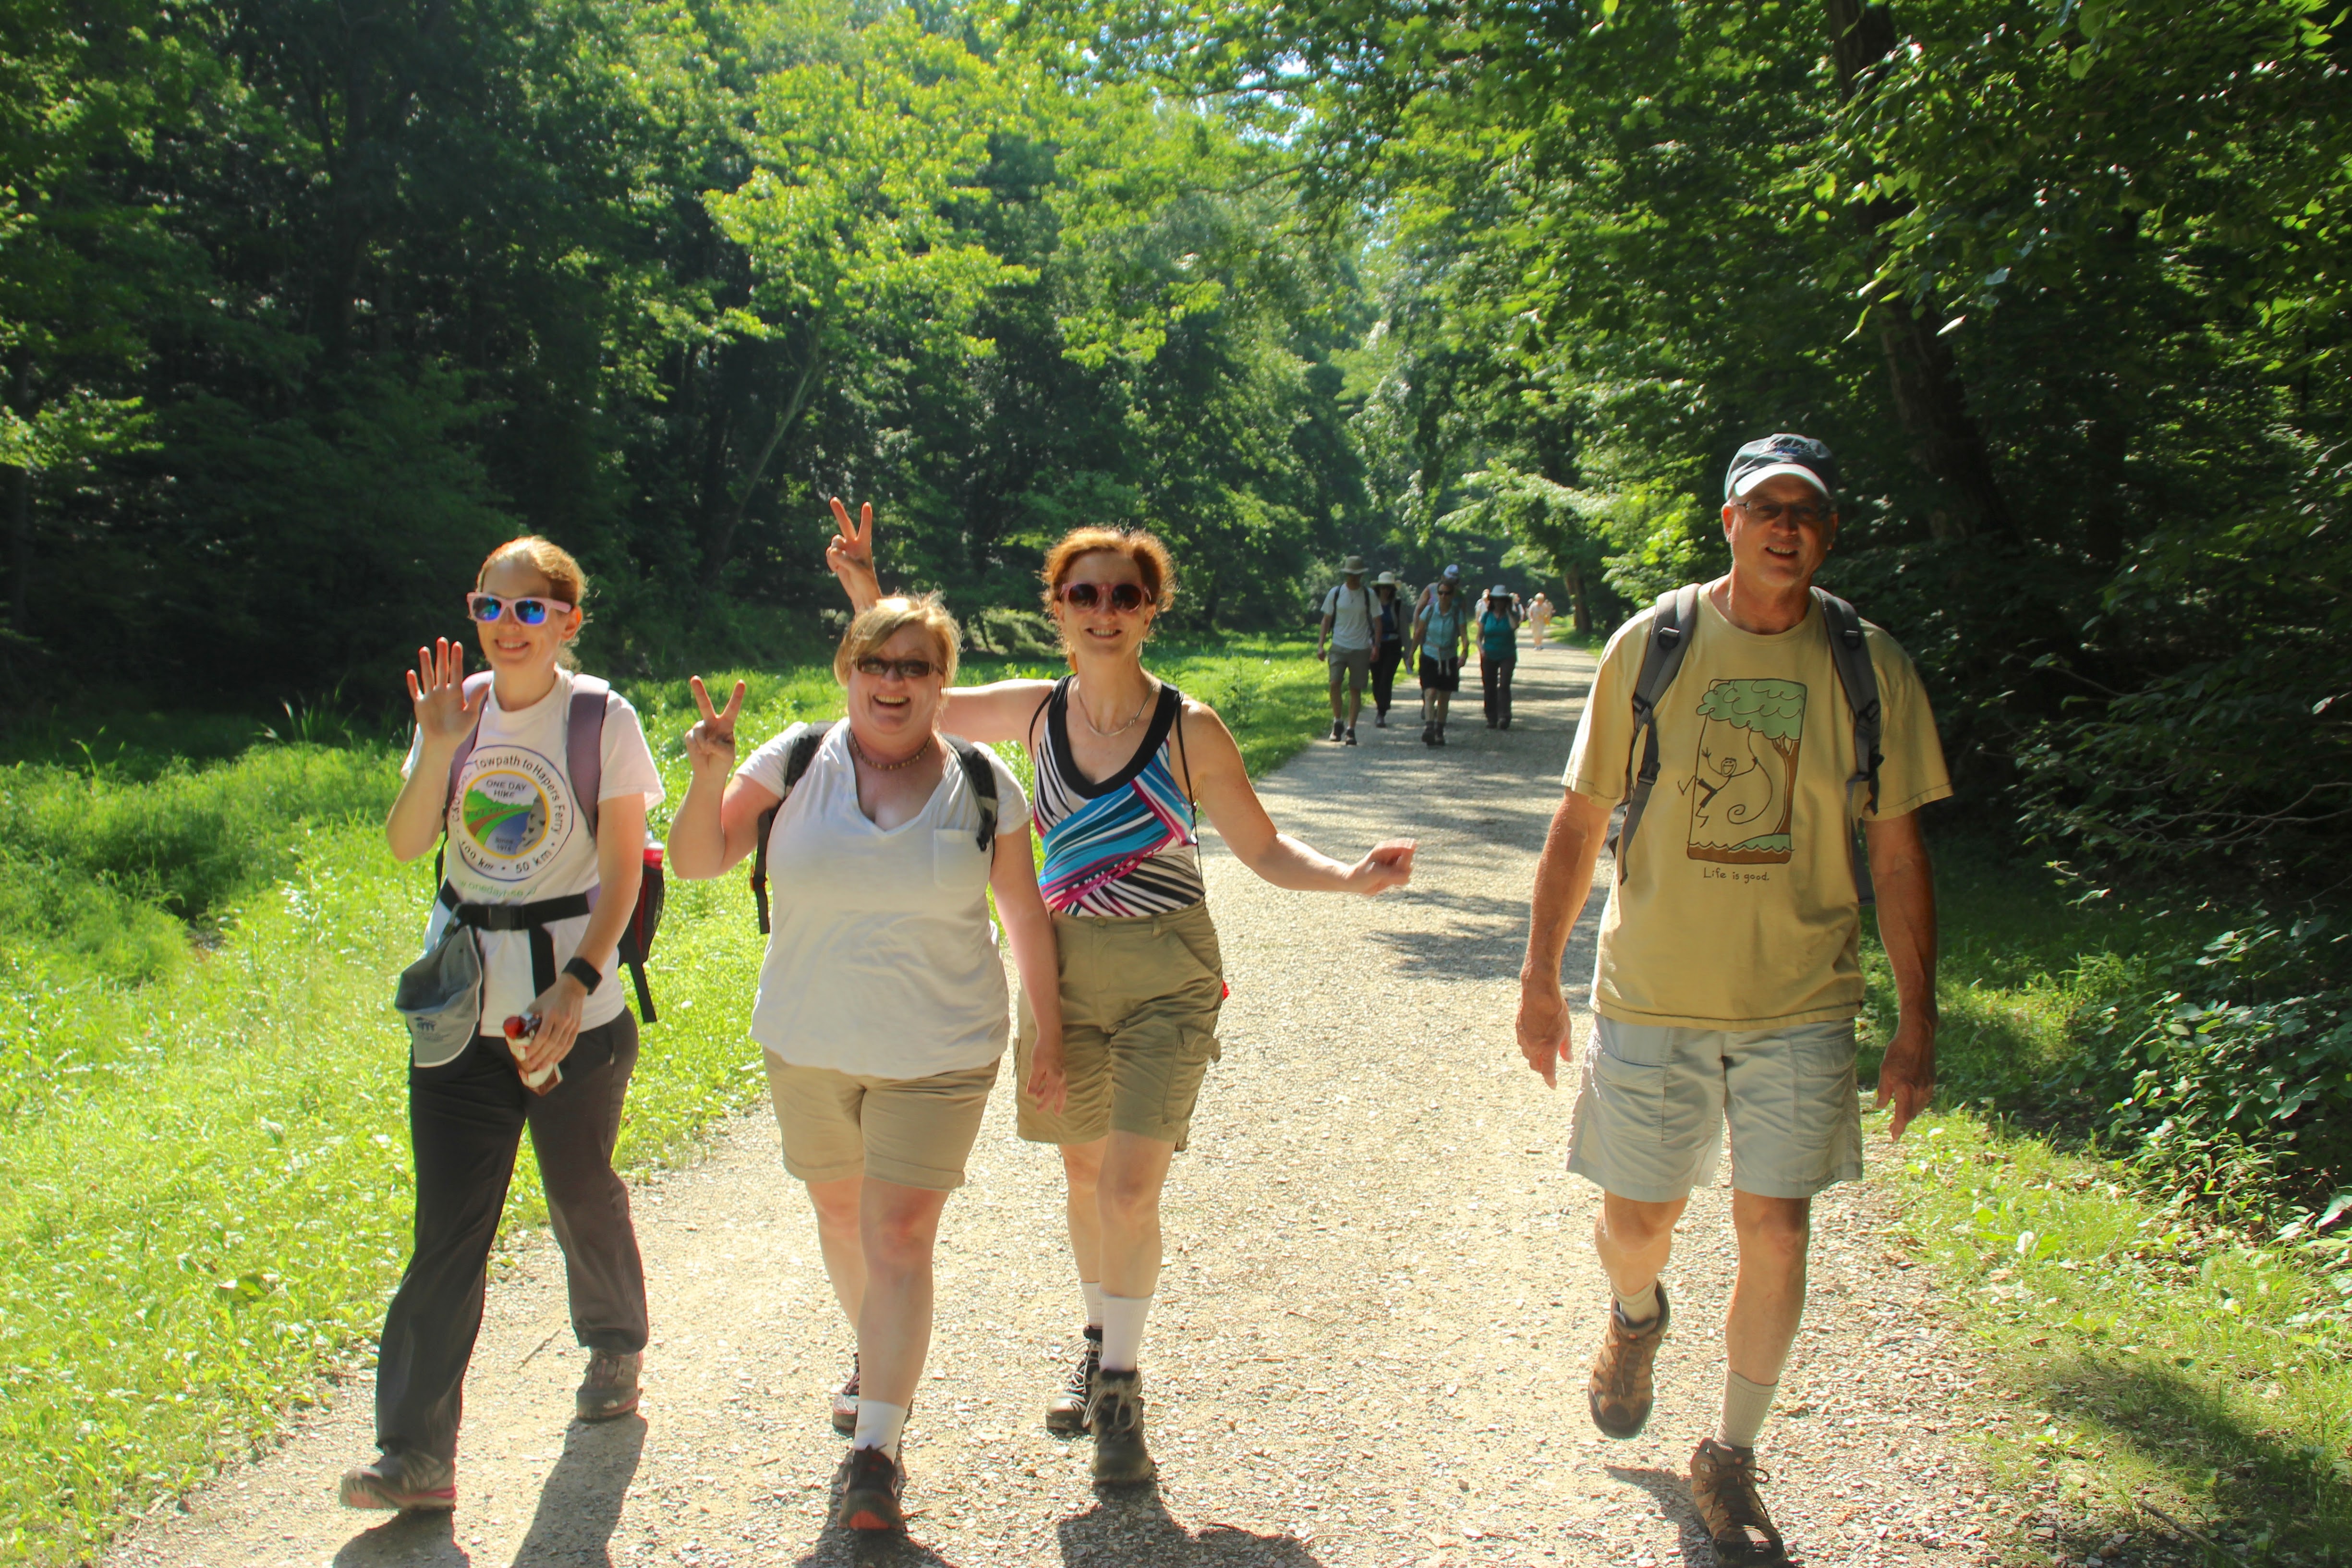 A group of people smile and put up peace signs as the walk on the trail